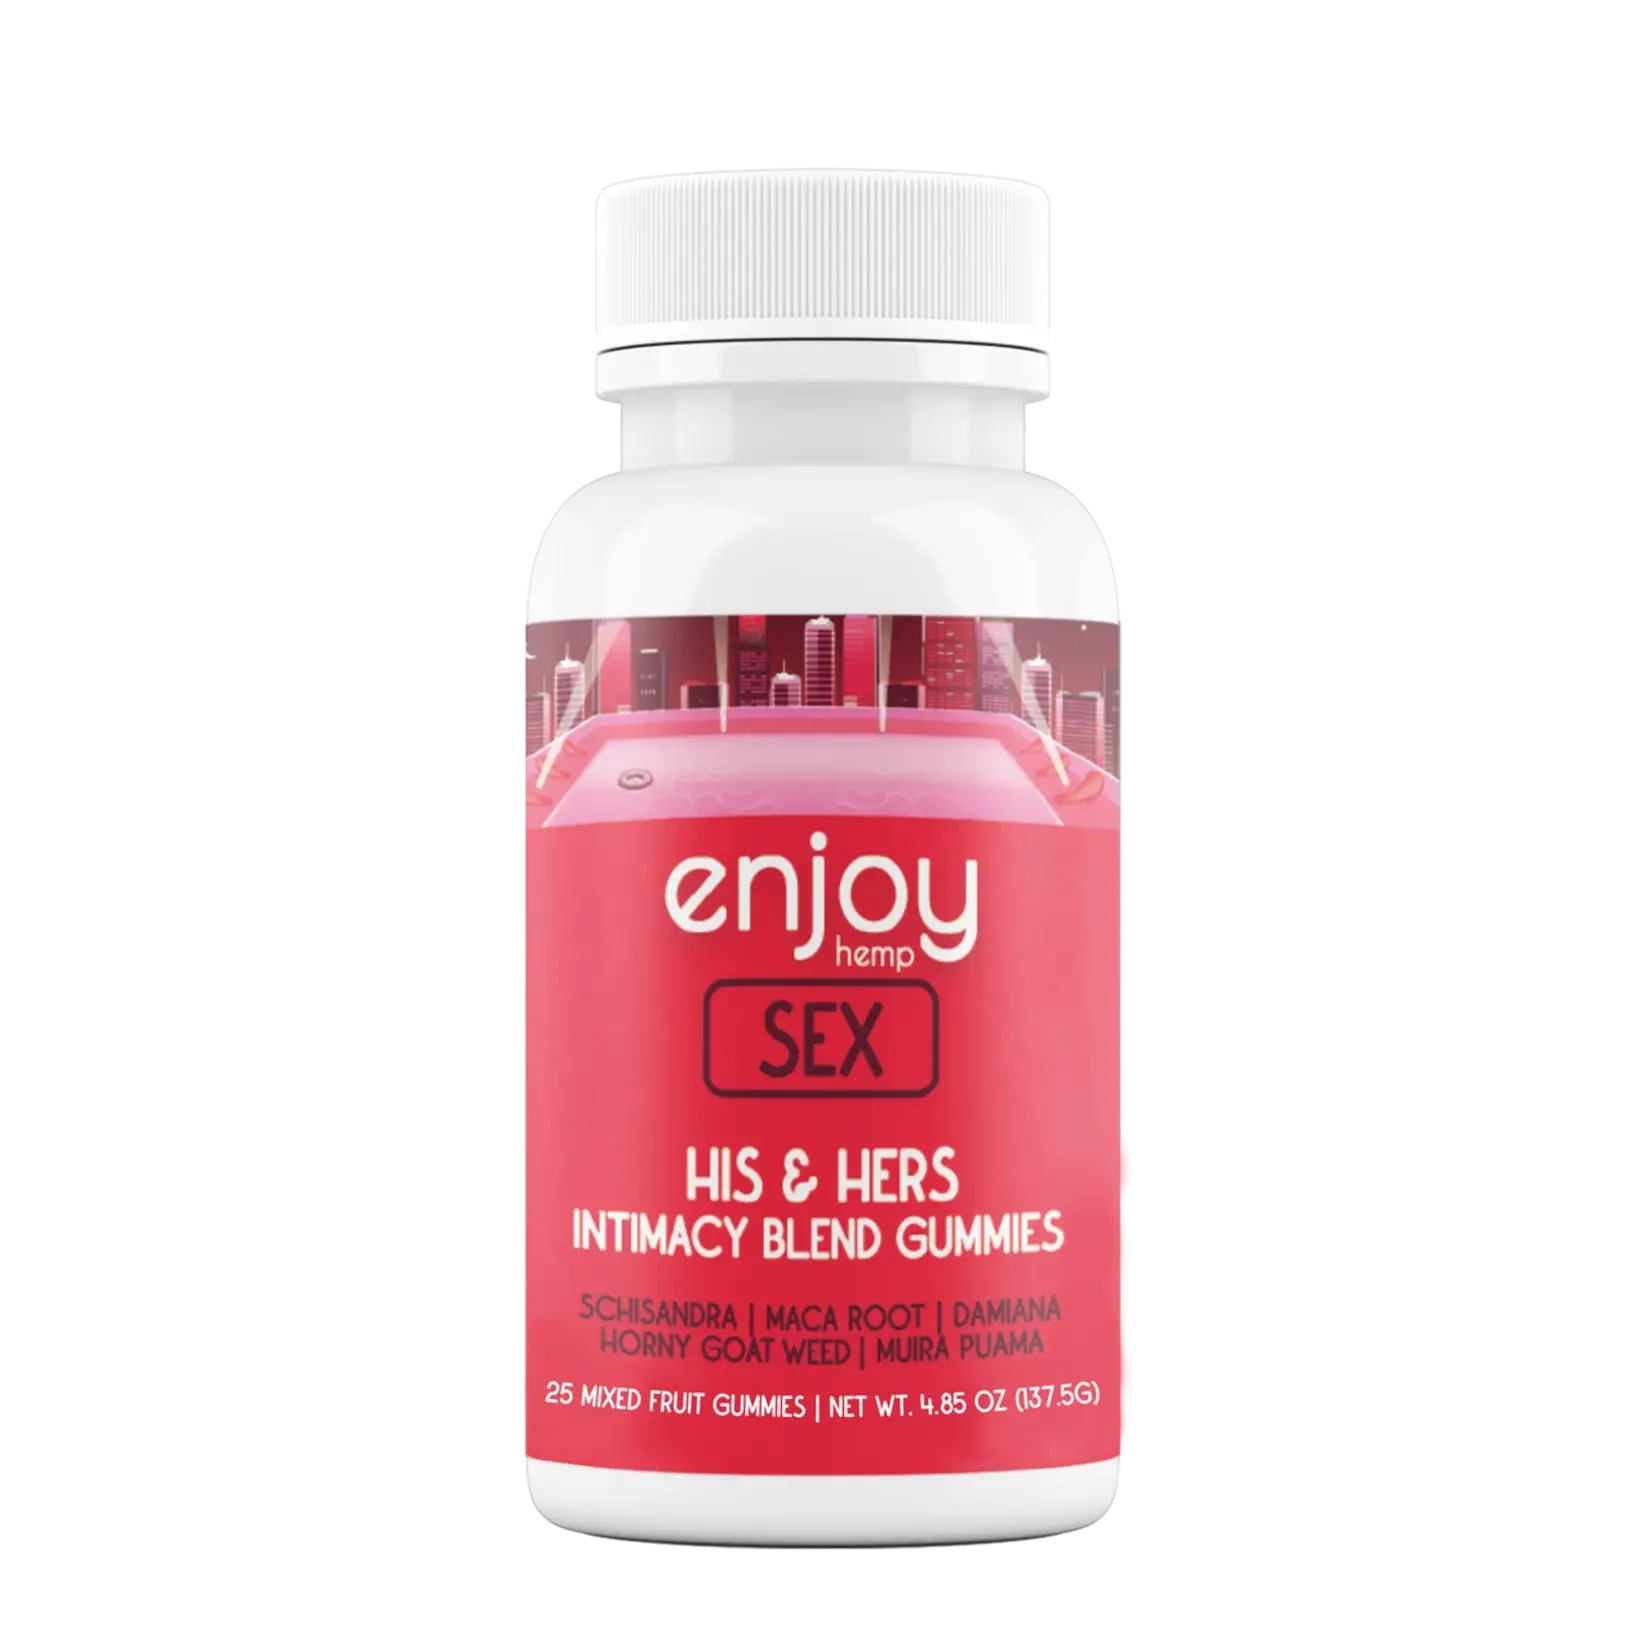 Enjoy Fast Acting SEX Intimacy Blend Gummies for Him and Her Health4Nola - HEALTH 4 NOLA LLC - 3200 Severn Avenue - Suite pic